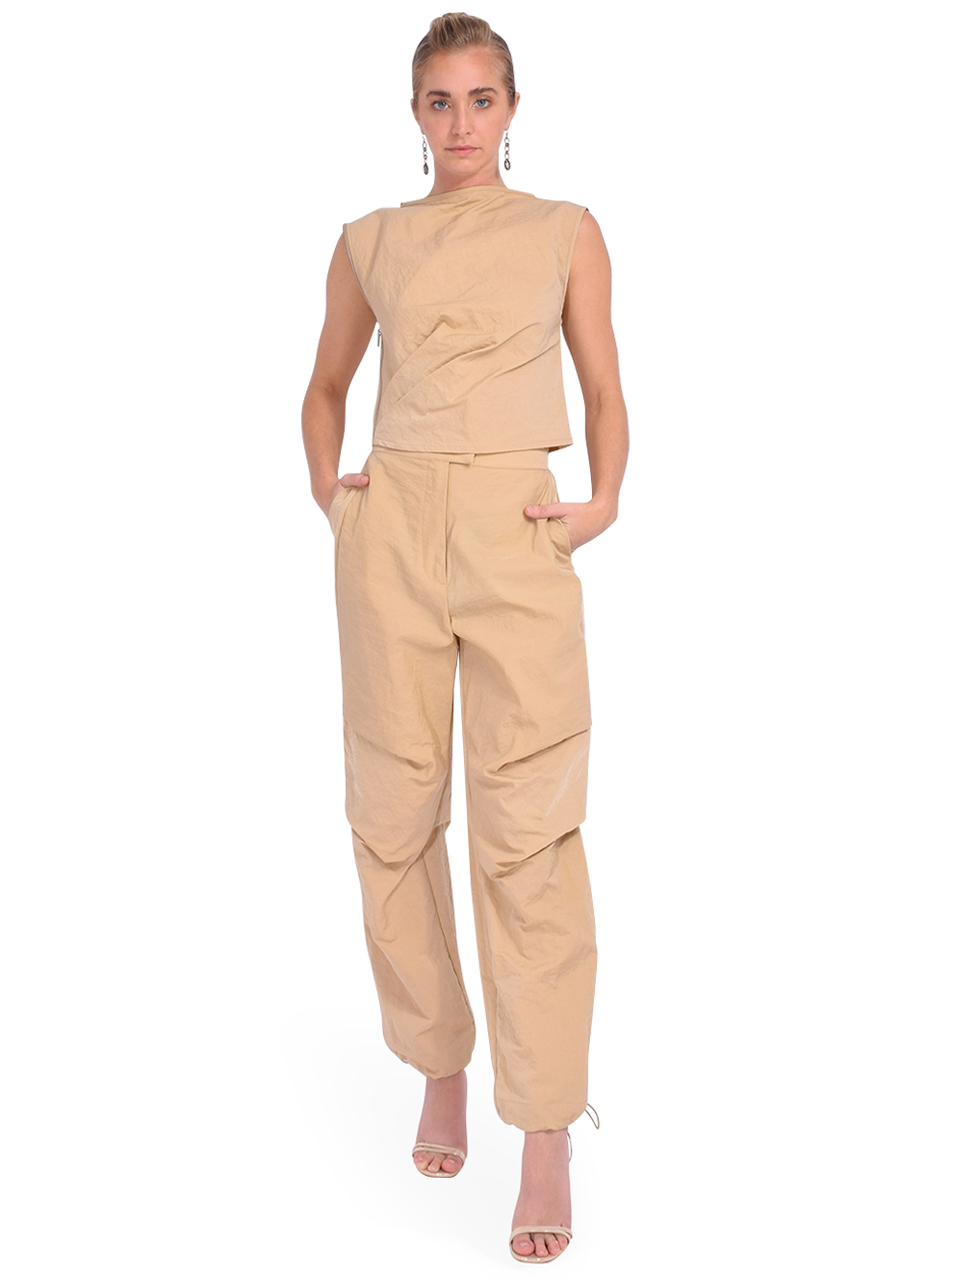 RABENS SALONER Alpha Nylon Pant in Sculpture Full Outfit 